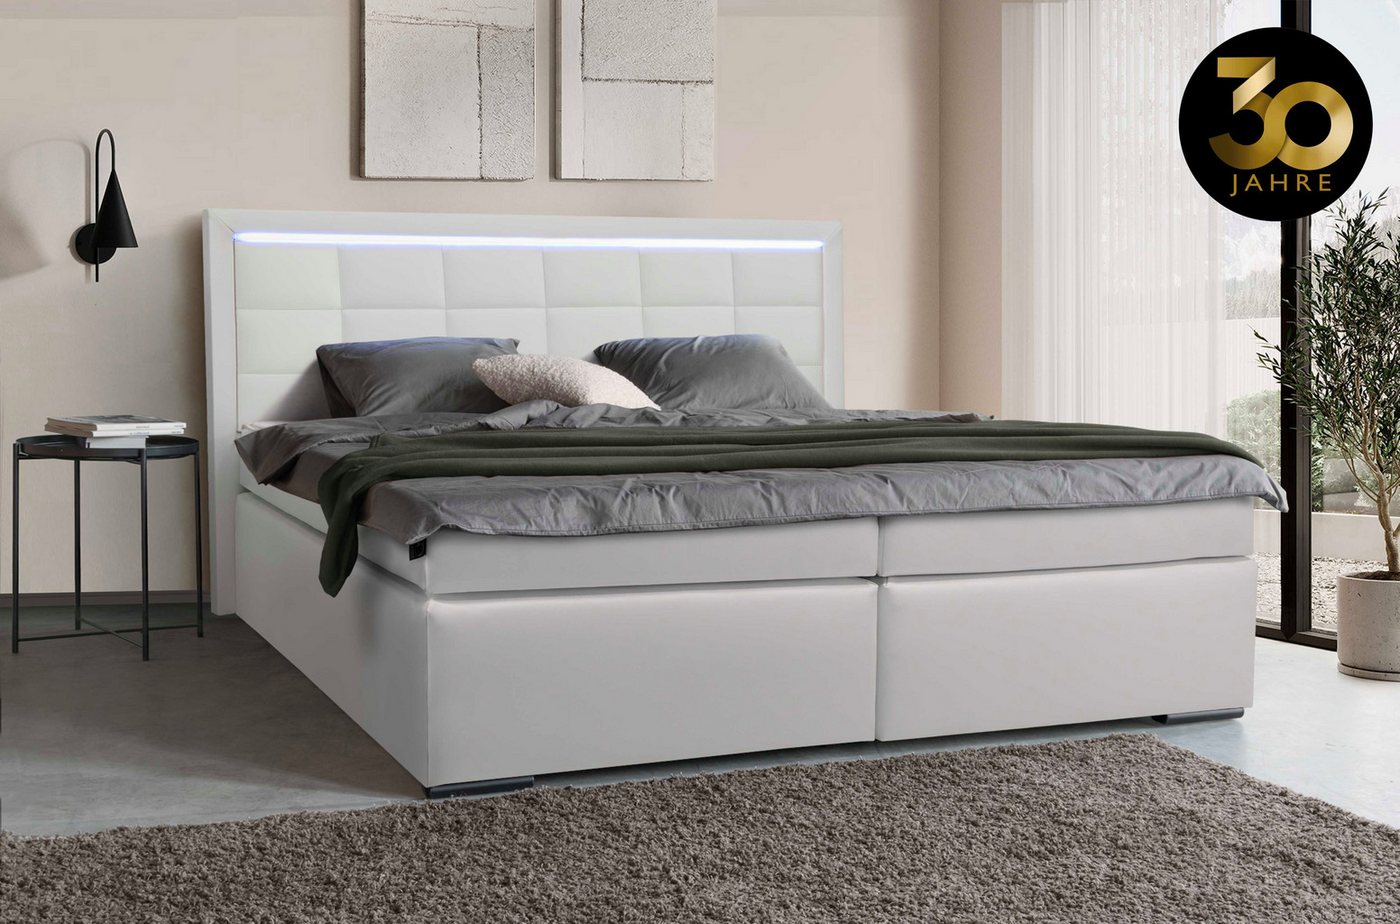 COLLECTION AB Boxspringbett 30 Jahre Jubiläums-Modell Athena, in H2,H3 & H4, inkl. LED-Leiste von COLLECTION AB